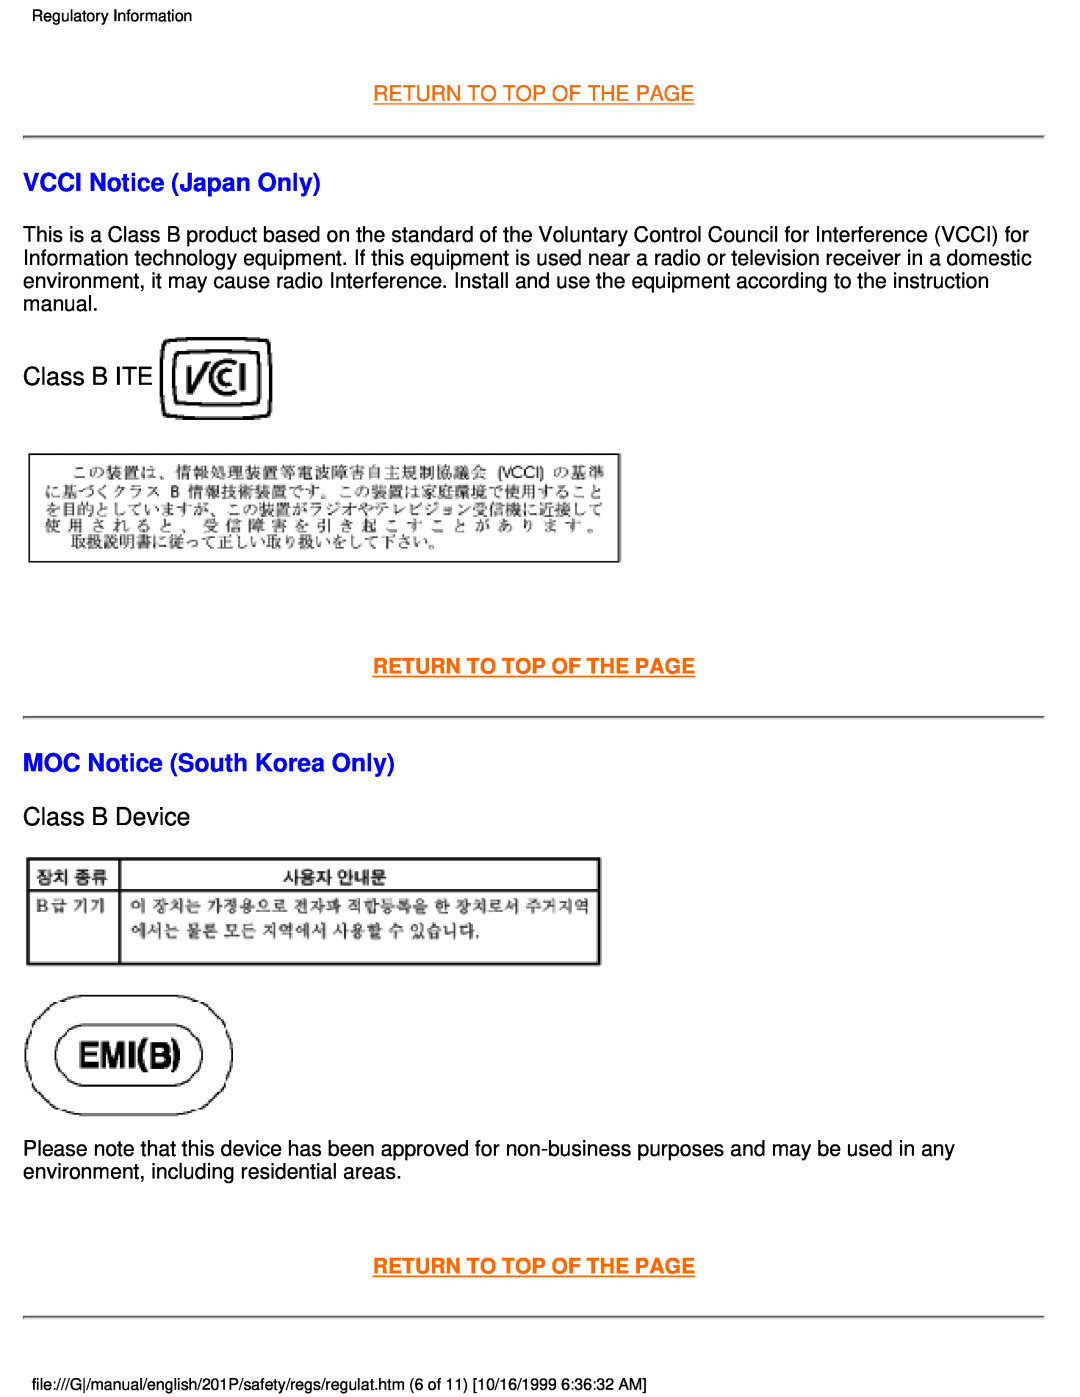 Philips 201P user manual VCCI Notice Japan Only, MOC Notice South Korea Only, Return To Top Of The Page 